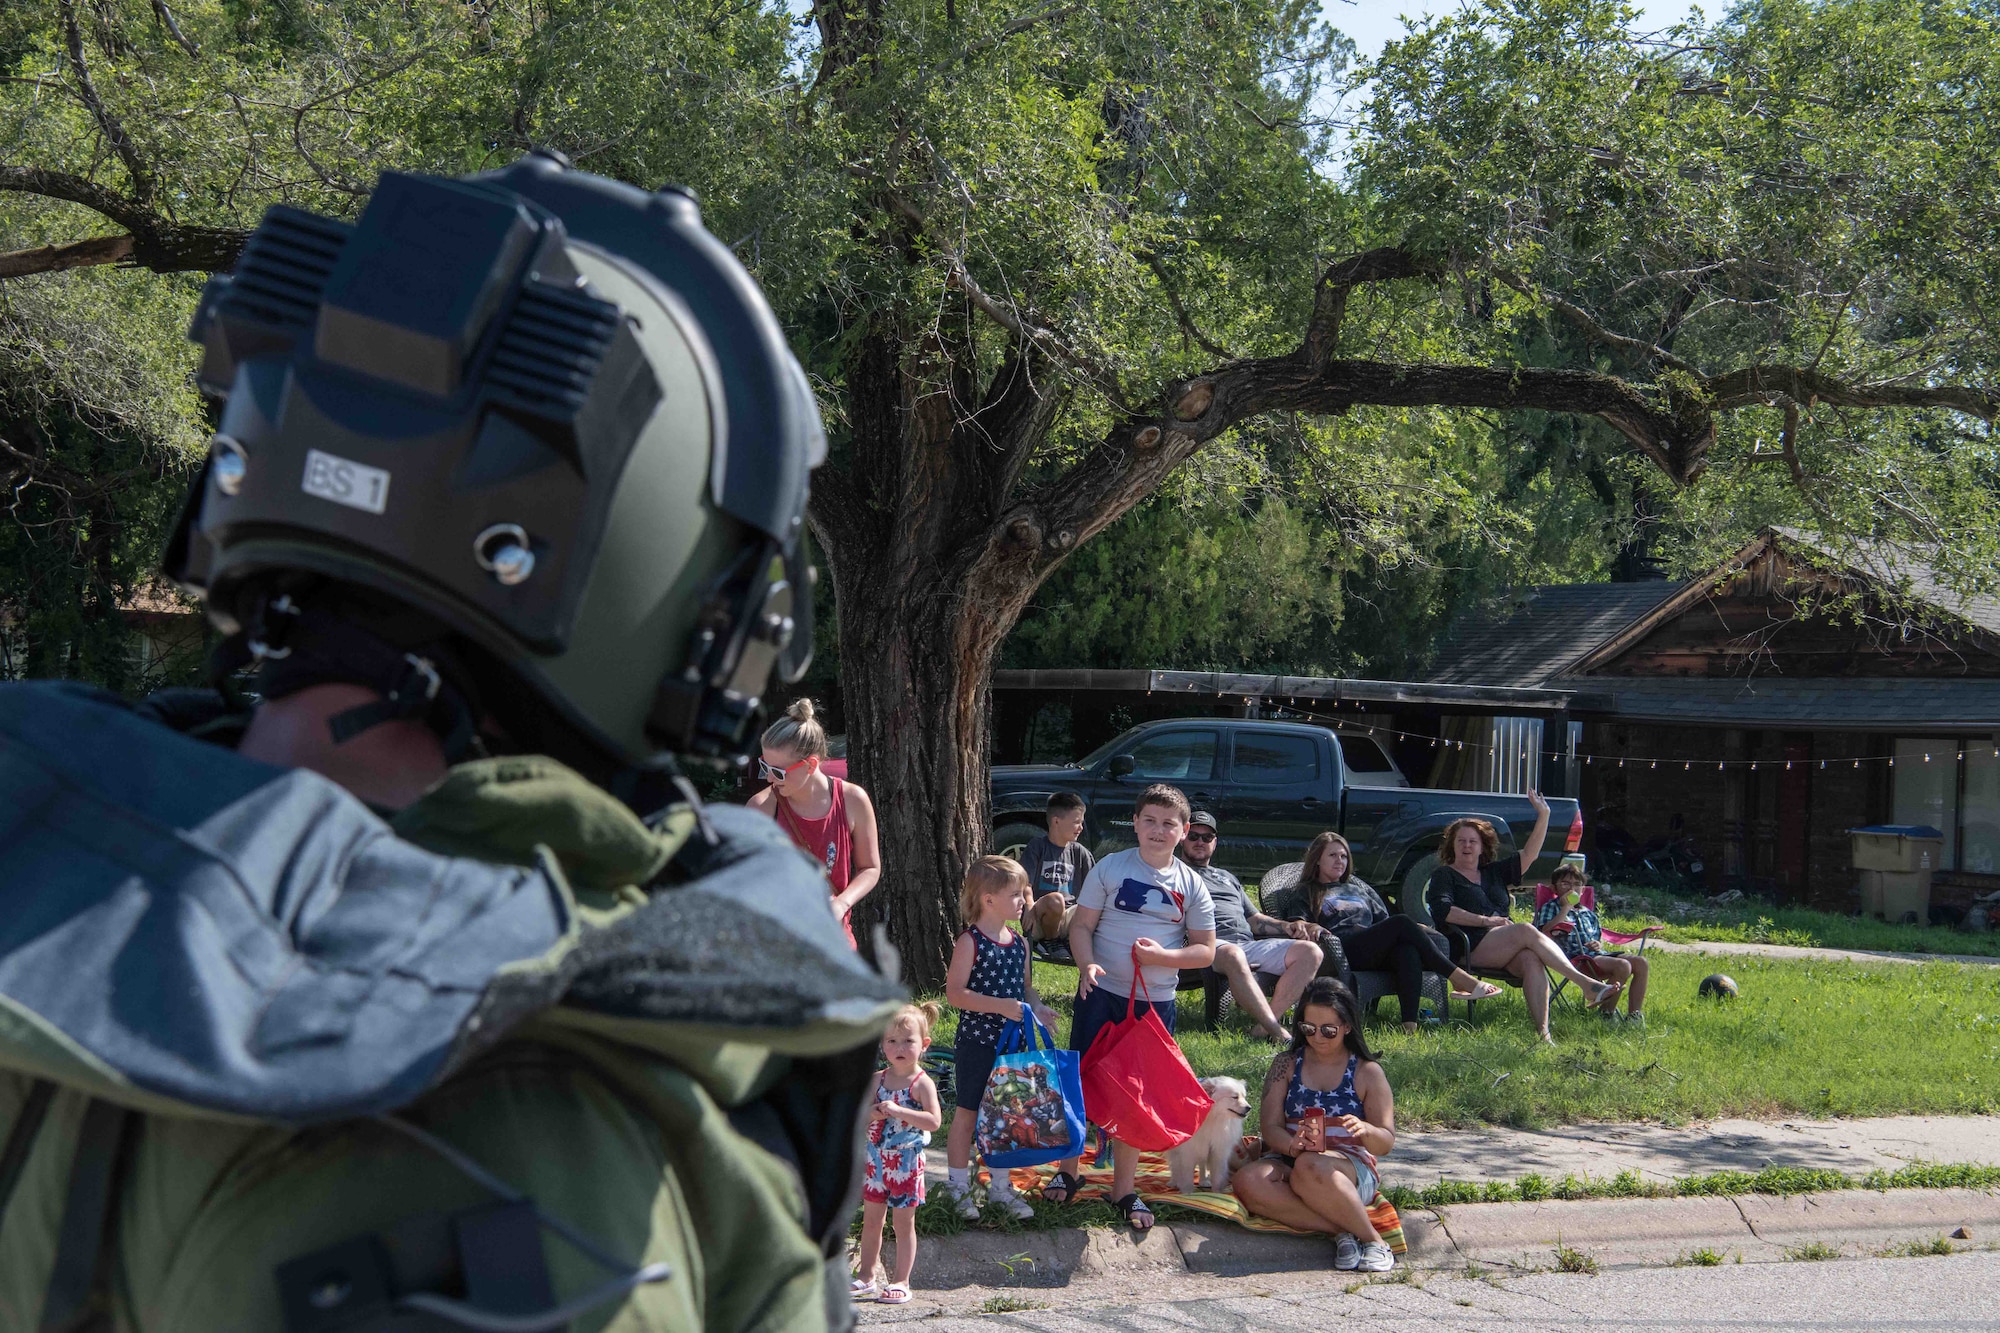 Master Sgt. John Wawrzynski, 22nd Civil Engineer Squadron explosive ordnance disposal flight superintendent, waves to parade attendees during the Derby Independence Day parade July 3, 2021, in Derby, Kansas. Wawrzynski displayed a blast-proof body suit and helmet weighing approximately 96 pounds throughout the parade. (U.S. Air Force photo by Senior Airman Marc A. Garcia)